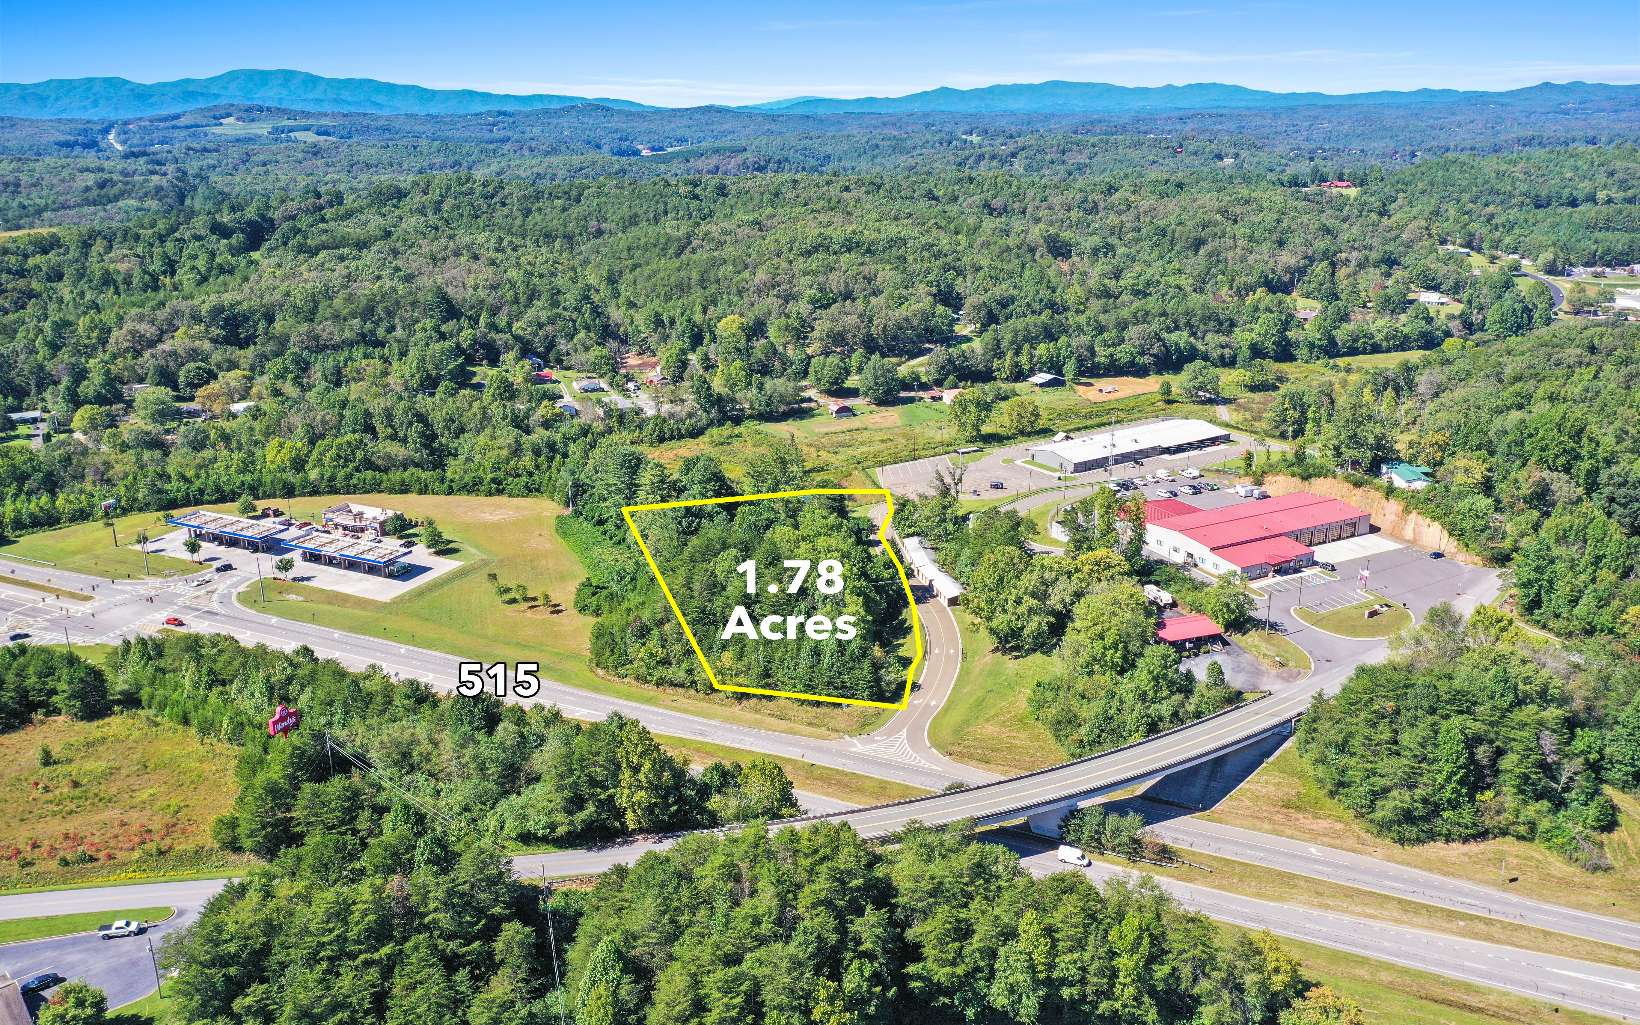 This 1.78 ac. lot on Hwy #515 next to Raceway Gas is the best lot available on 515 in Blue Ridge, property has 244 feet of highway frontage, very little dirt to be moved to make a great building lot. High exposure, high traffic area. All utilities available.